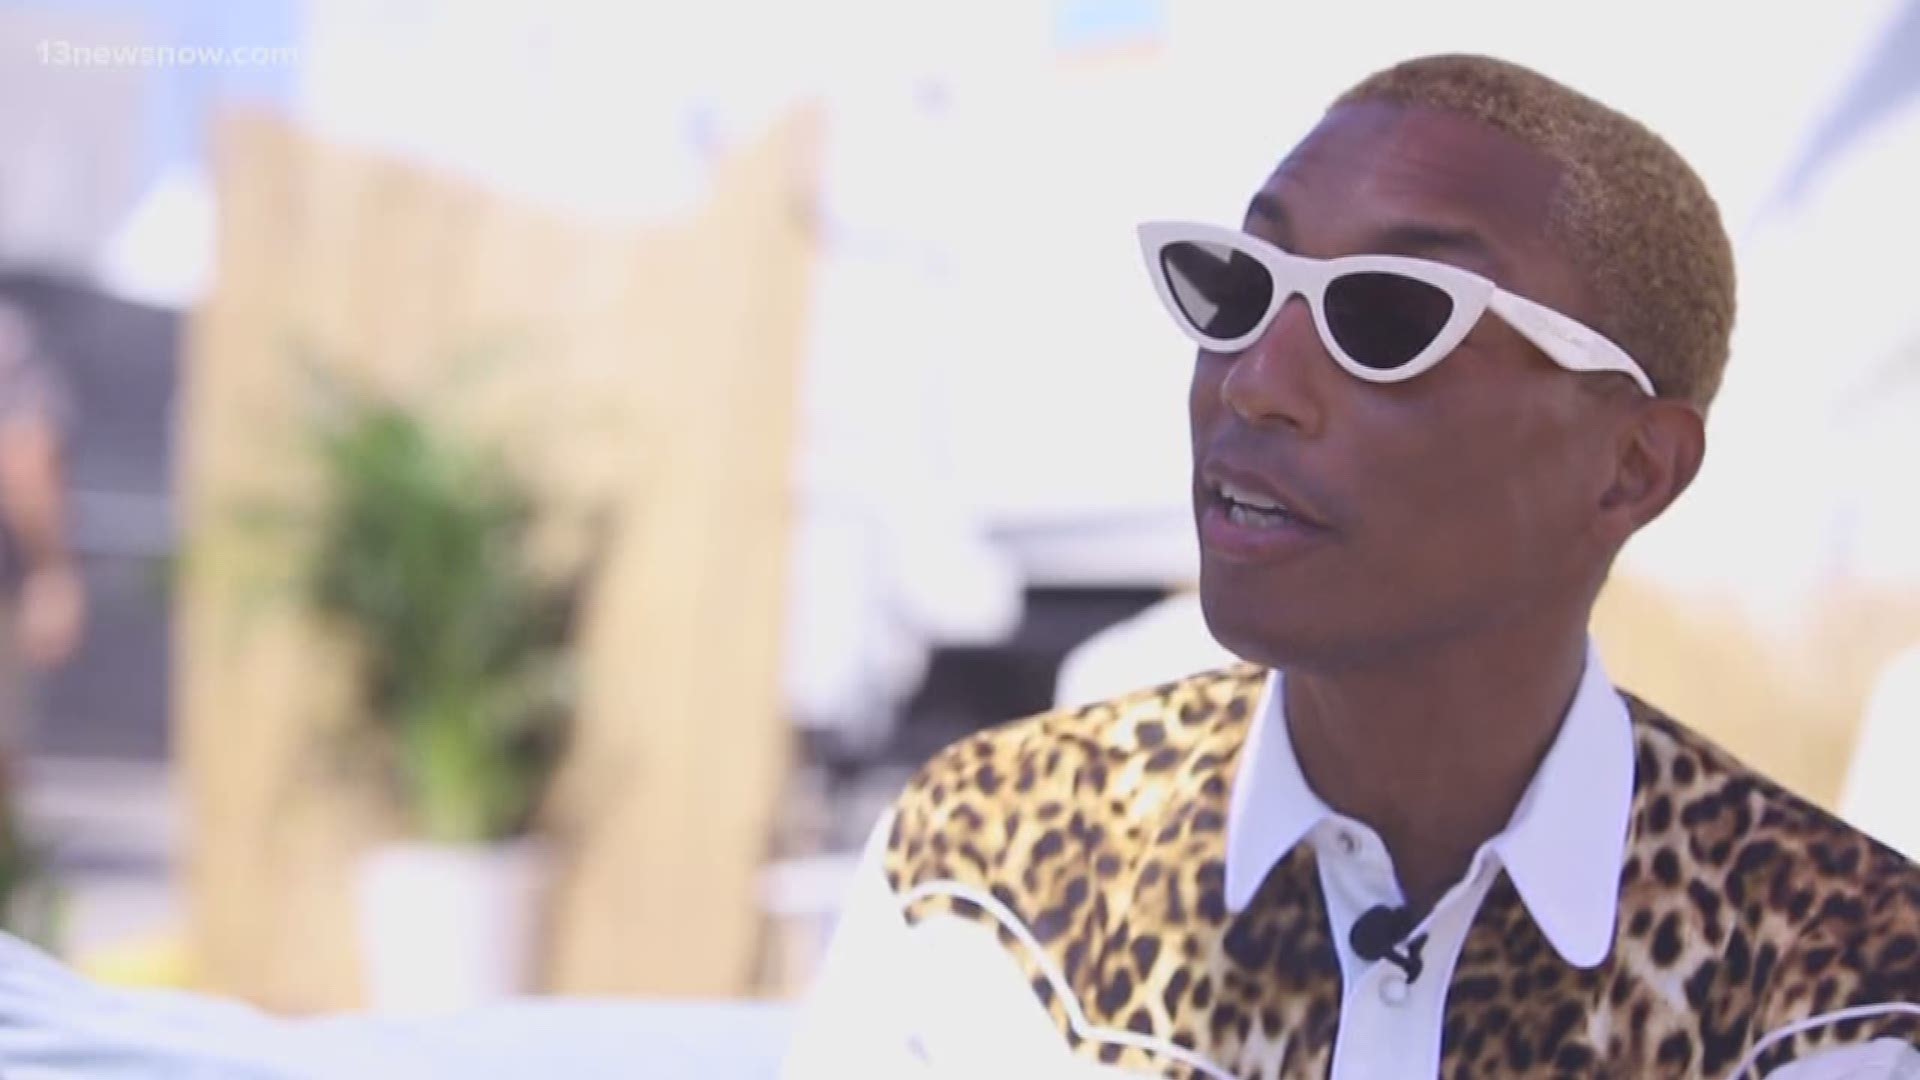 Pharrell said the festival is a way to show that Virginia Beach can welcome visitors with open arms.